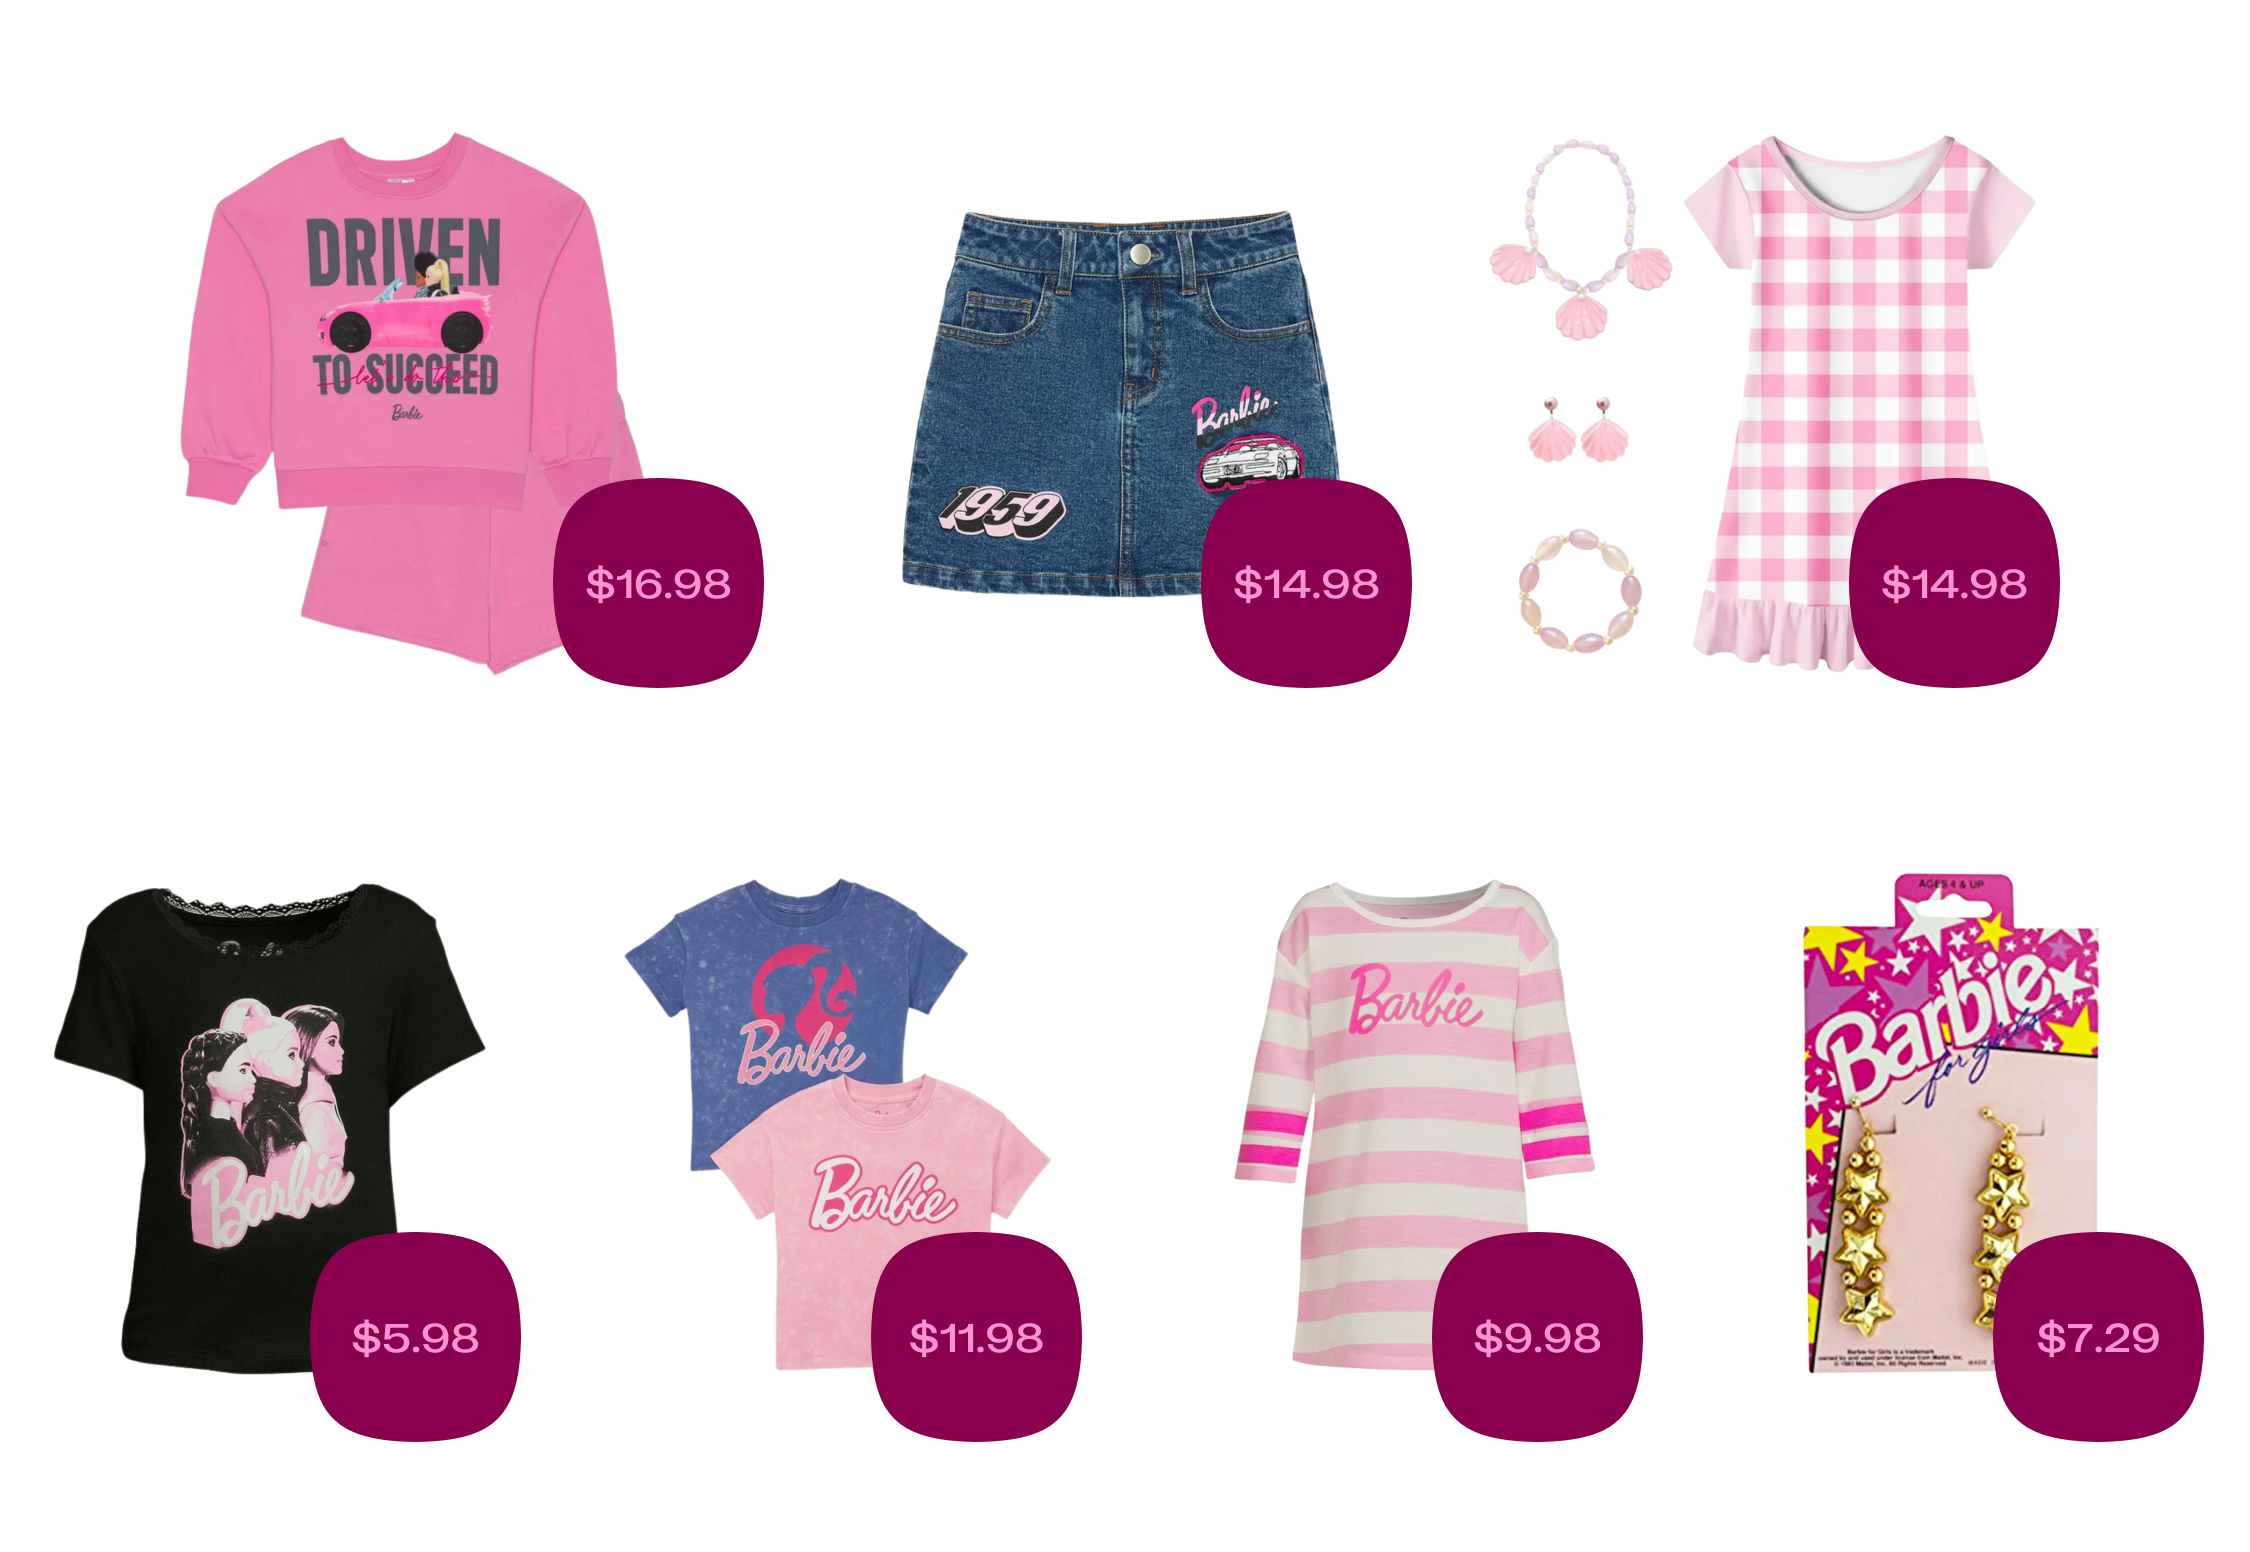 Different clothing items from the online Barbie shop on Walmart.com, including tees, pajamas, skirts, earrings and more themed for Barbie